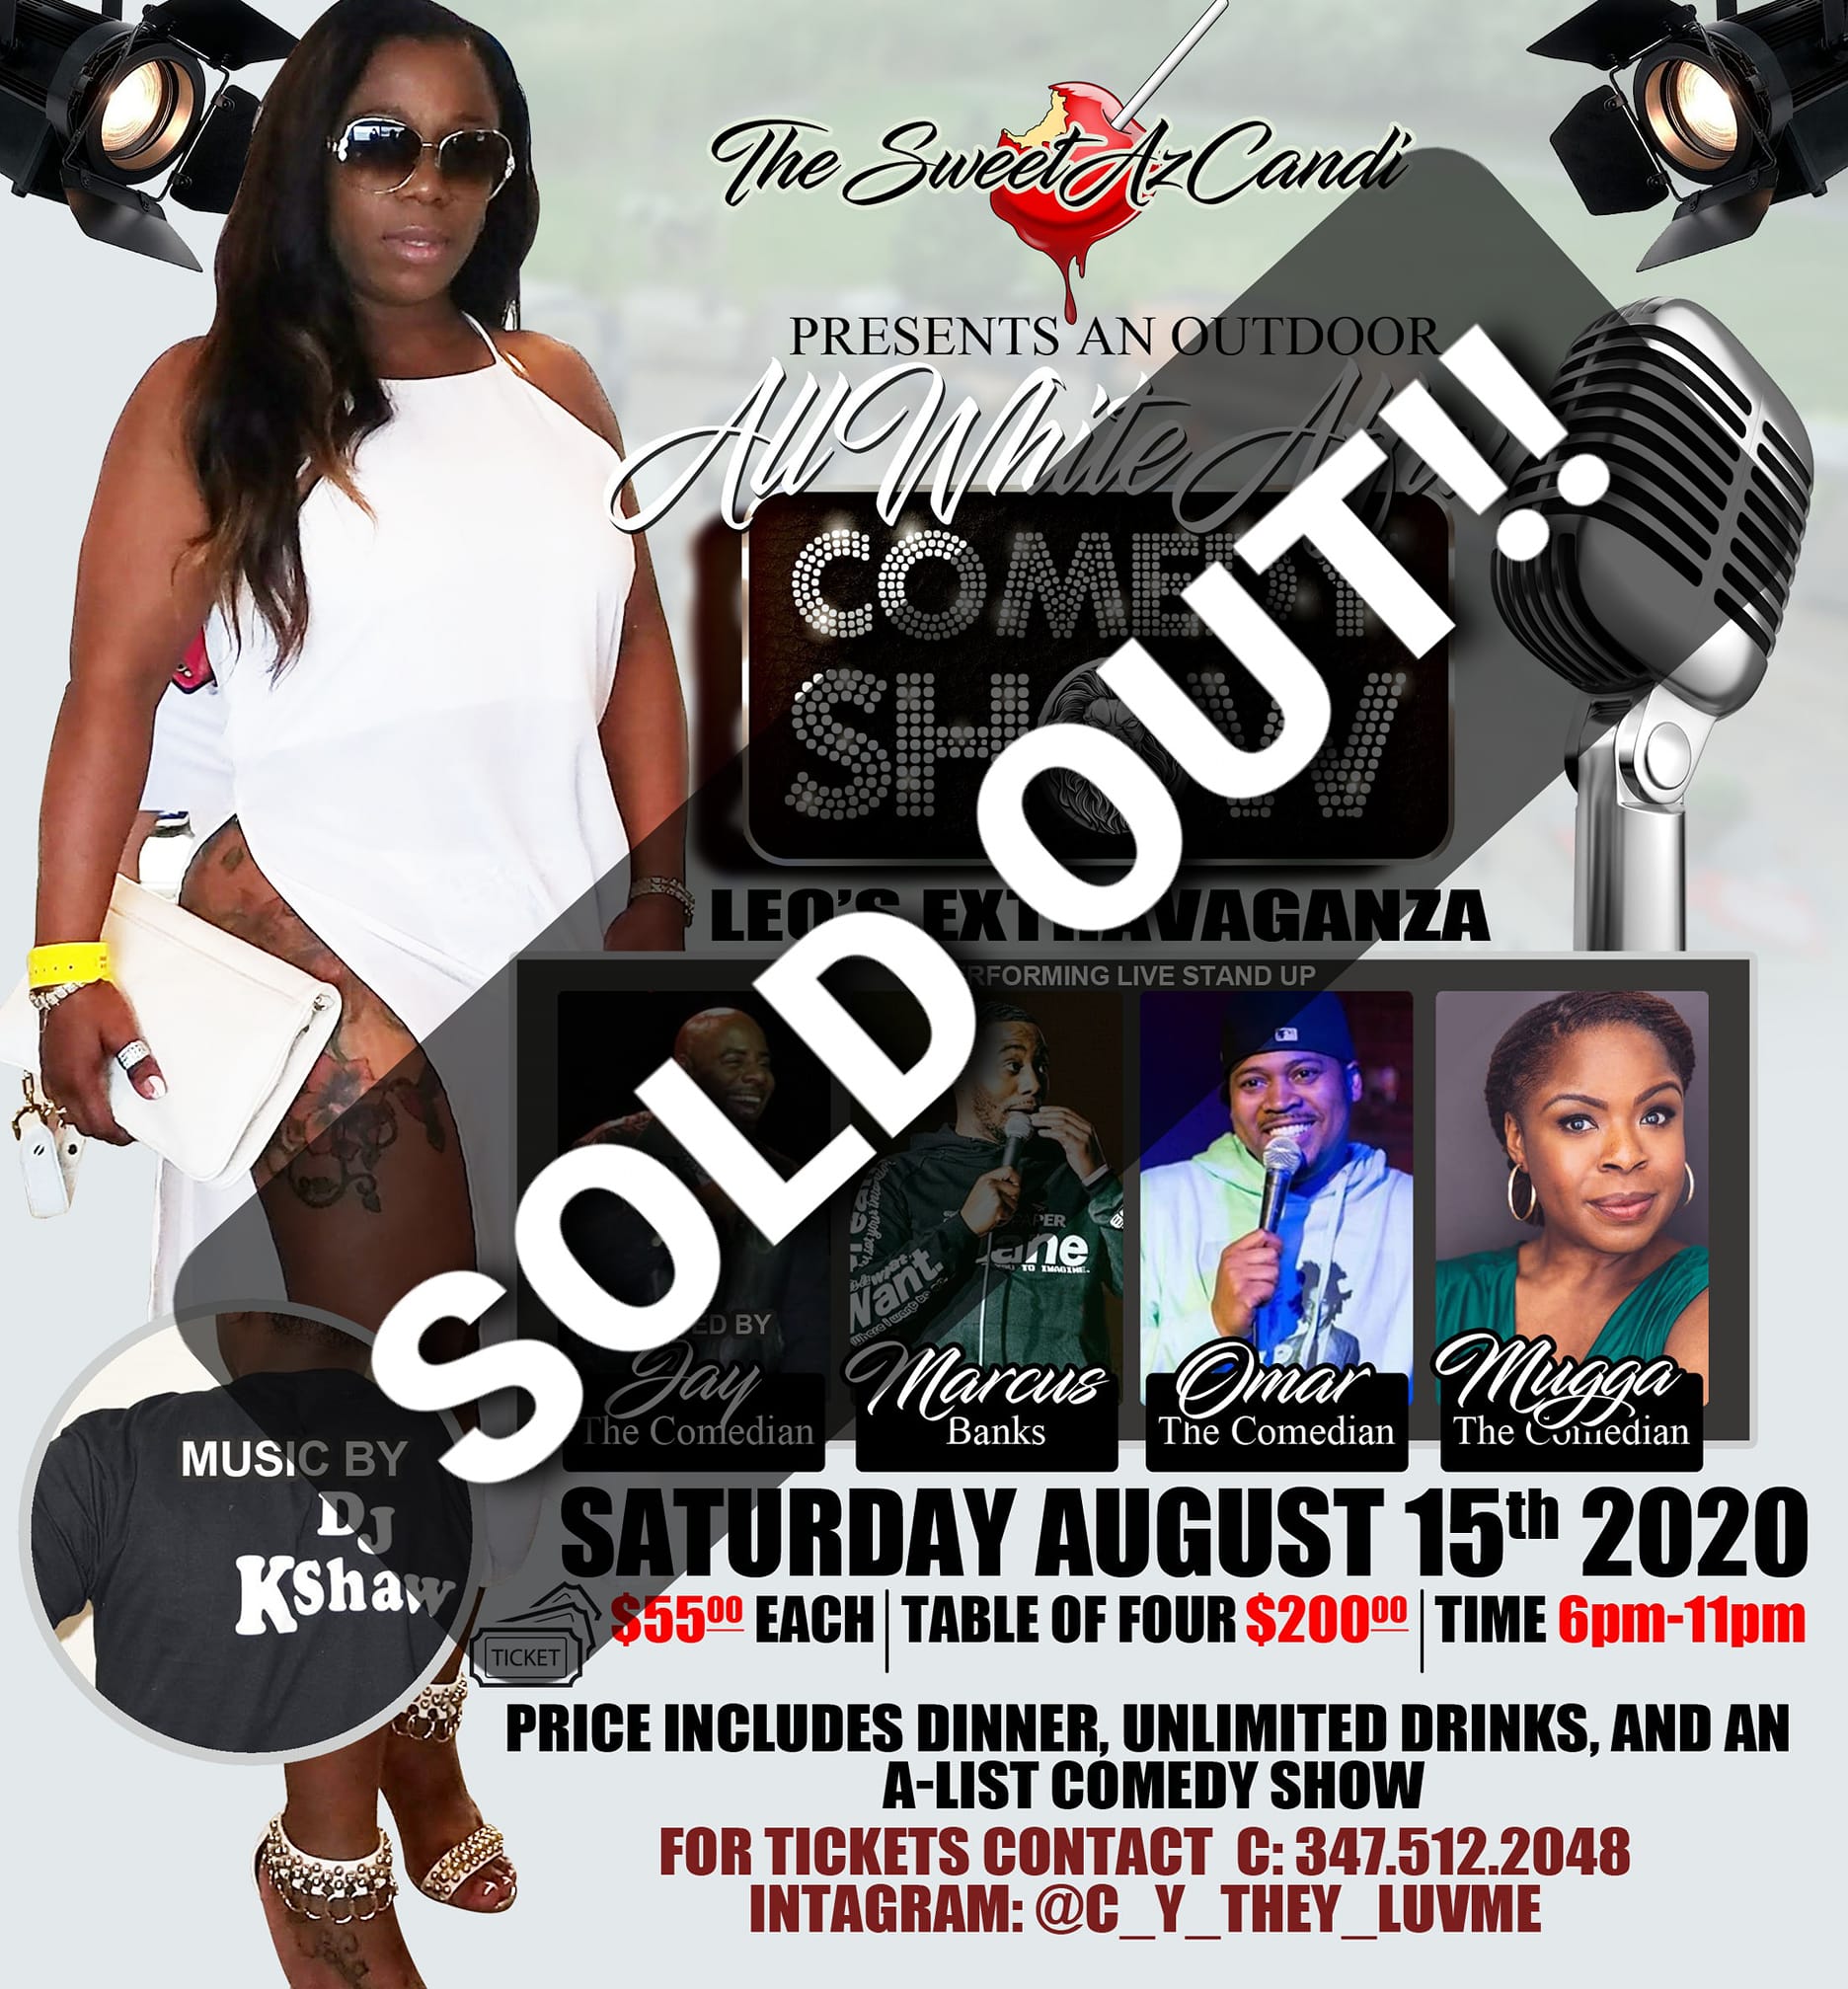 Outdoor All White Leo’s Extravaganza Comedy Show TBA Saturday August 15, 2020